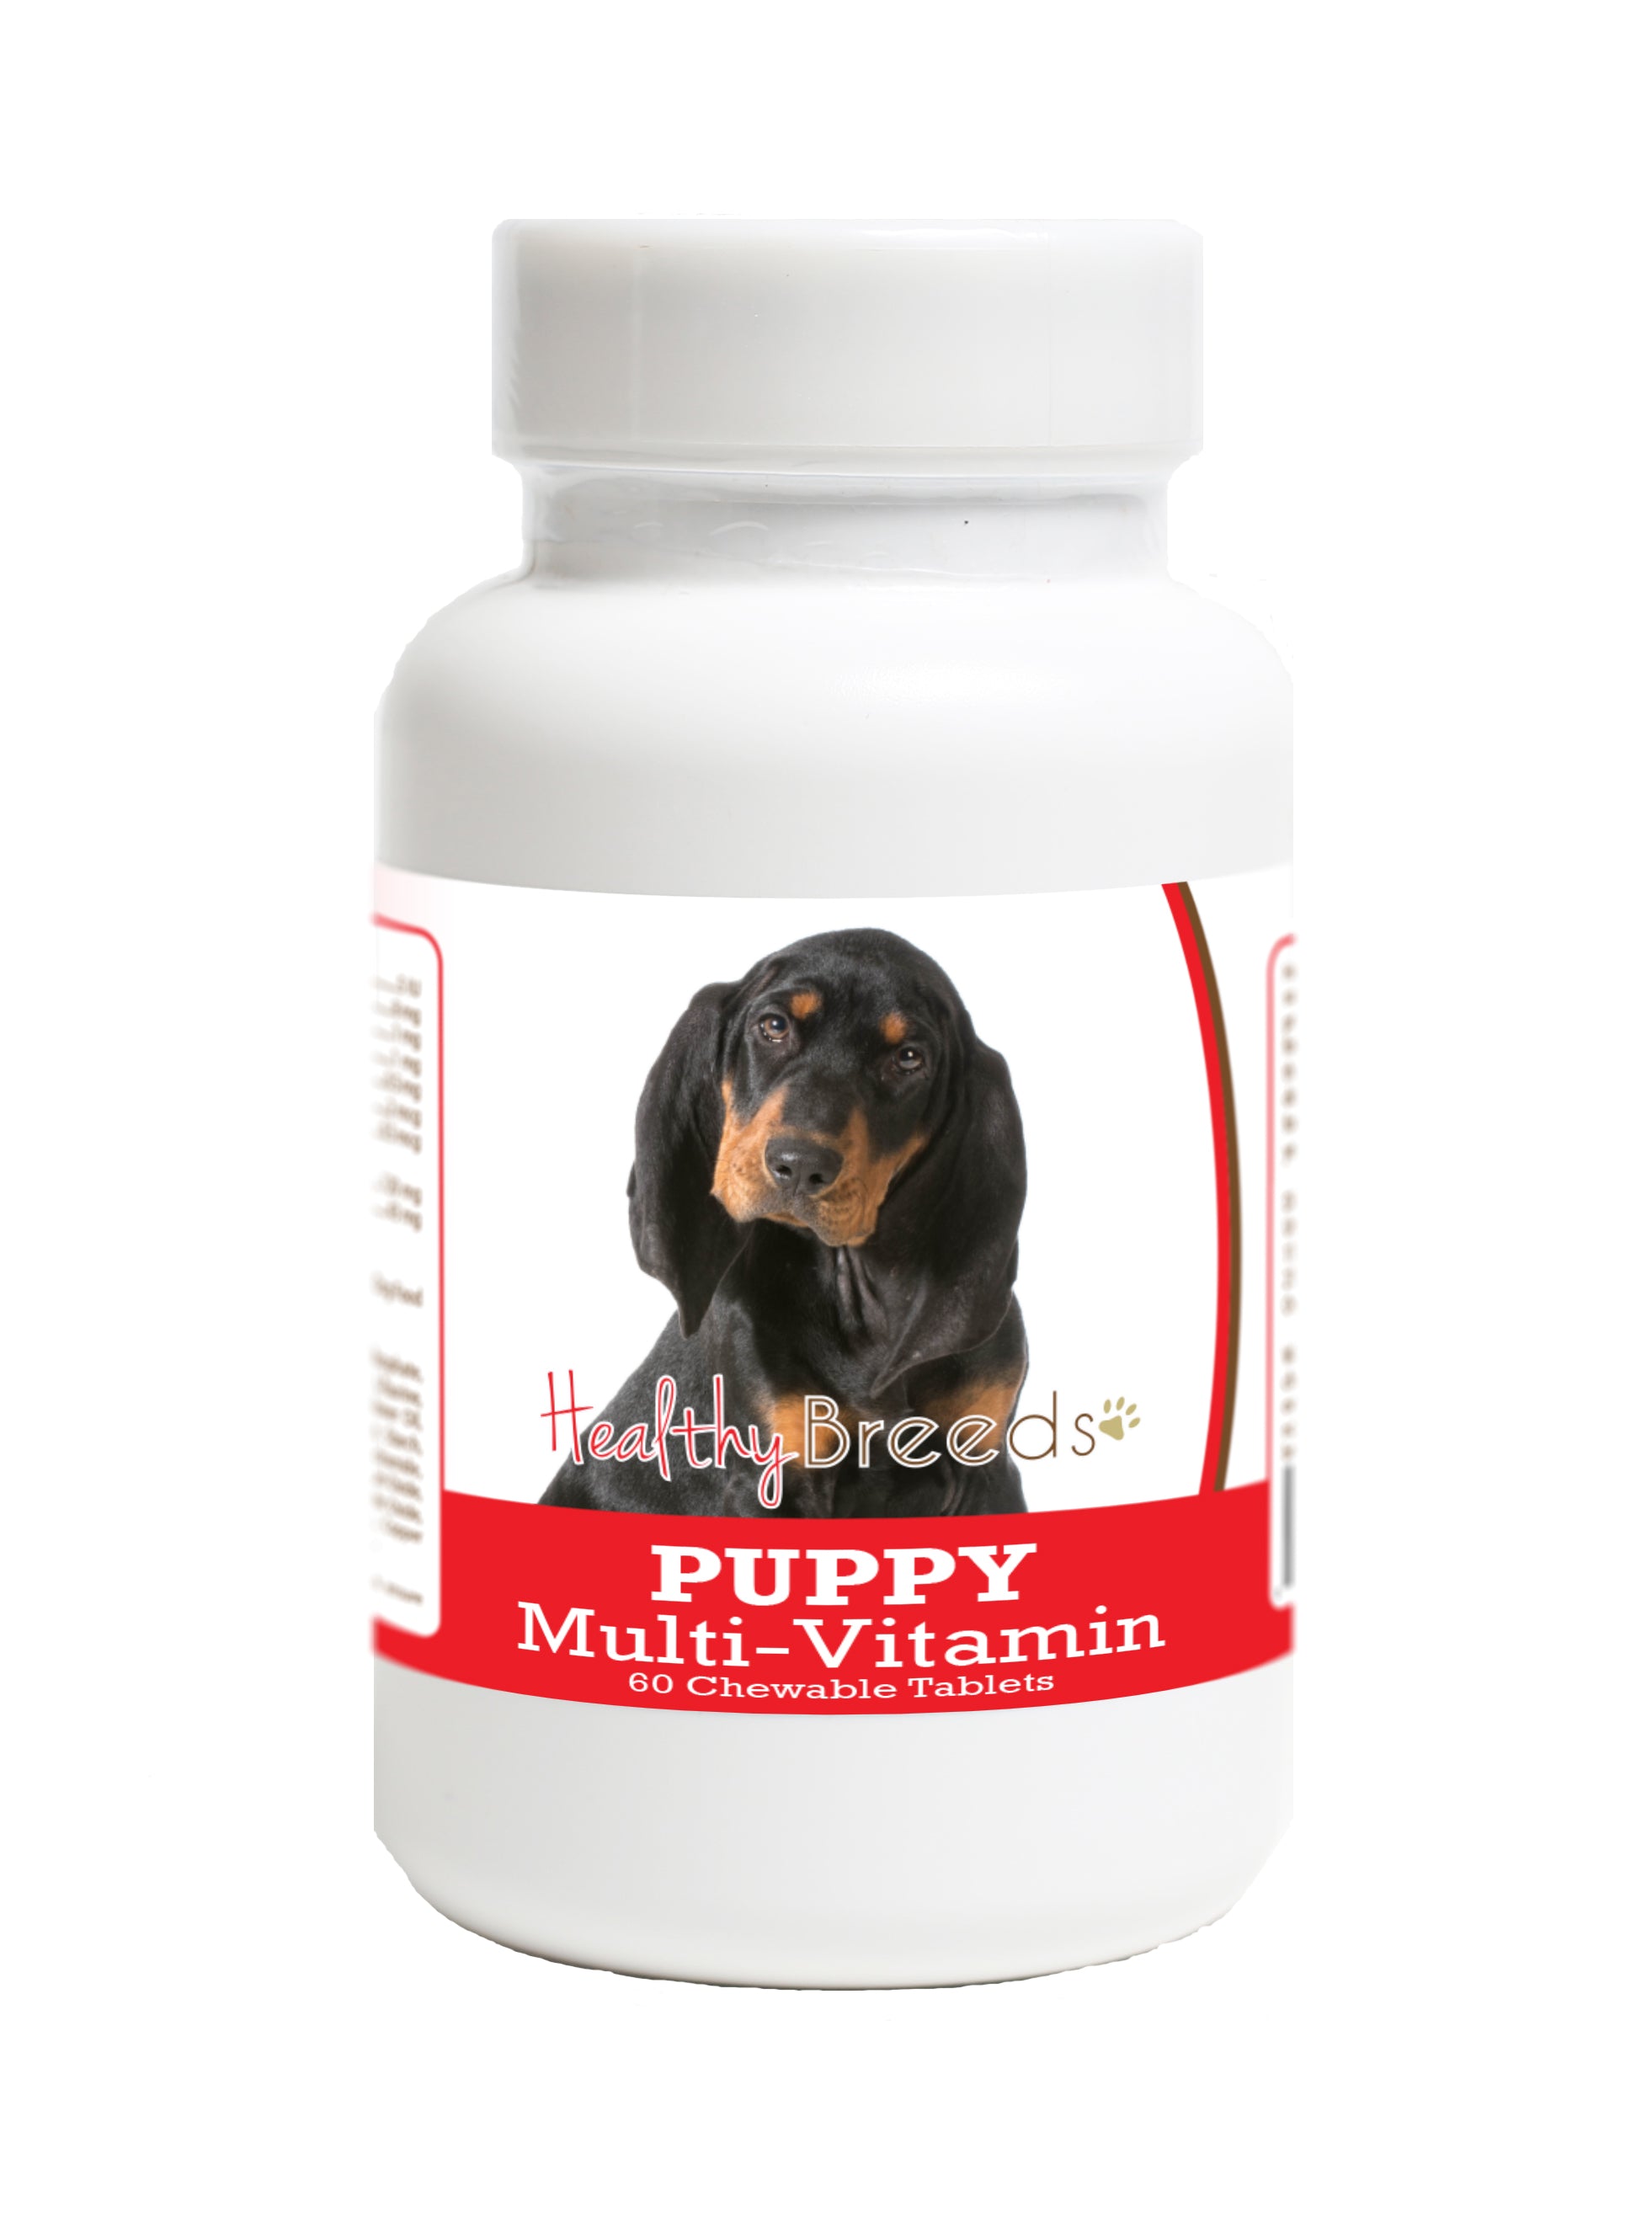 Black and Tan Coonhound Puppy Dog Multivitamin Tablet 60 Count